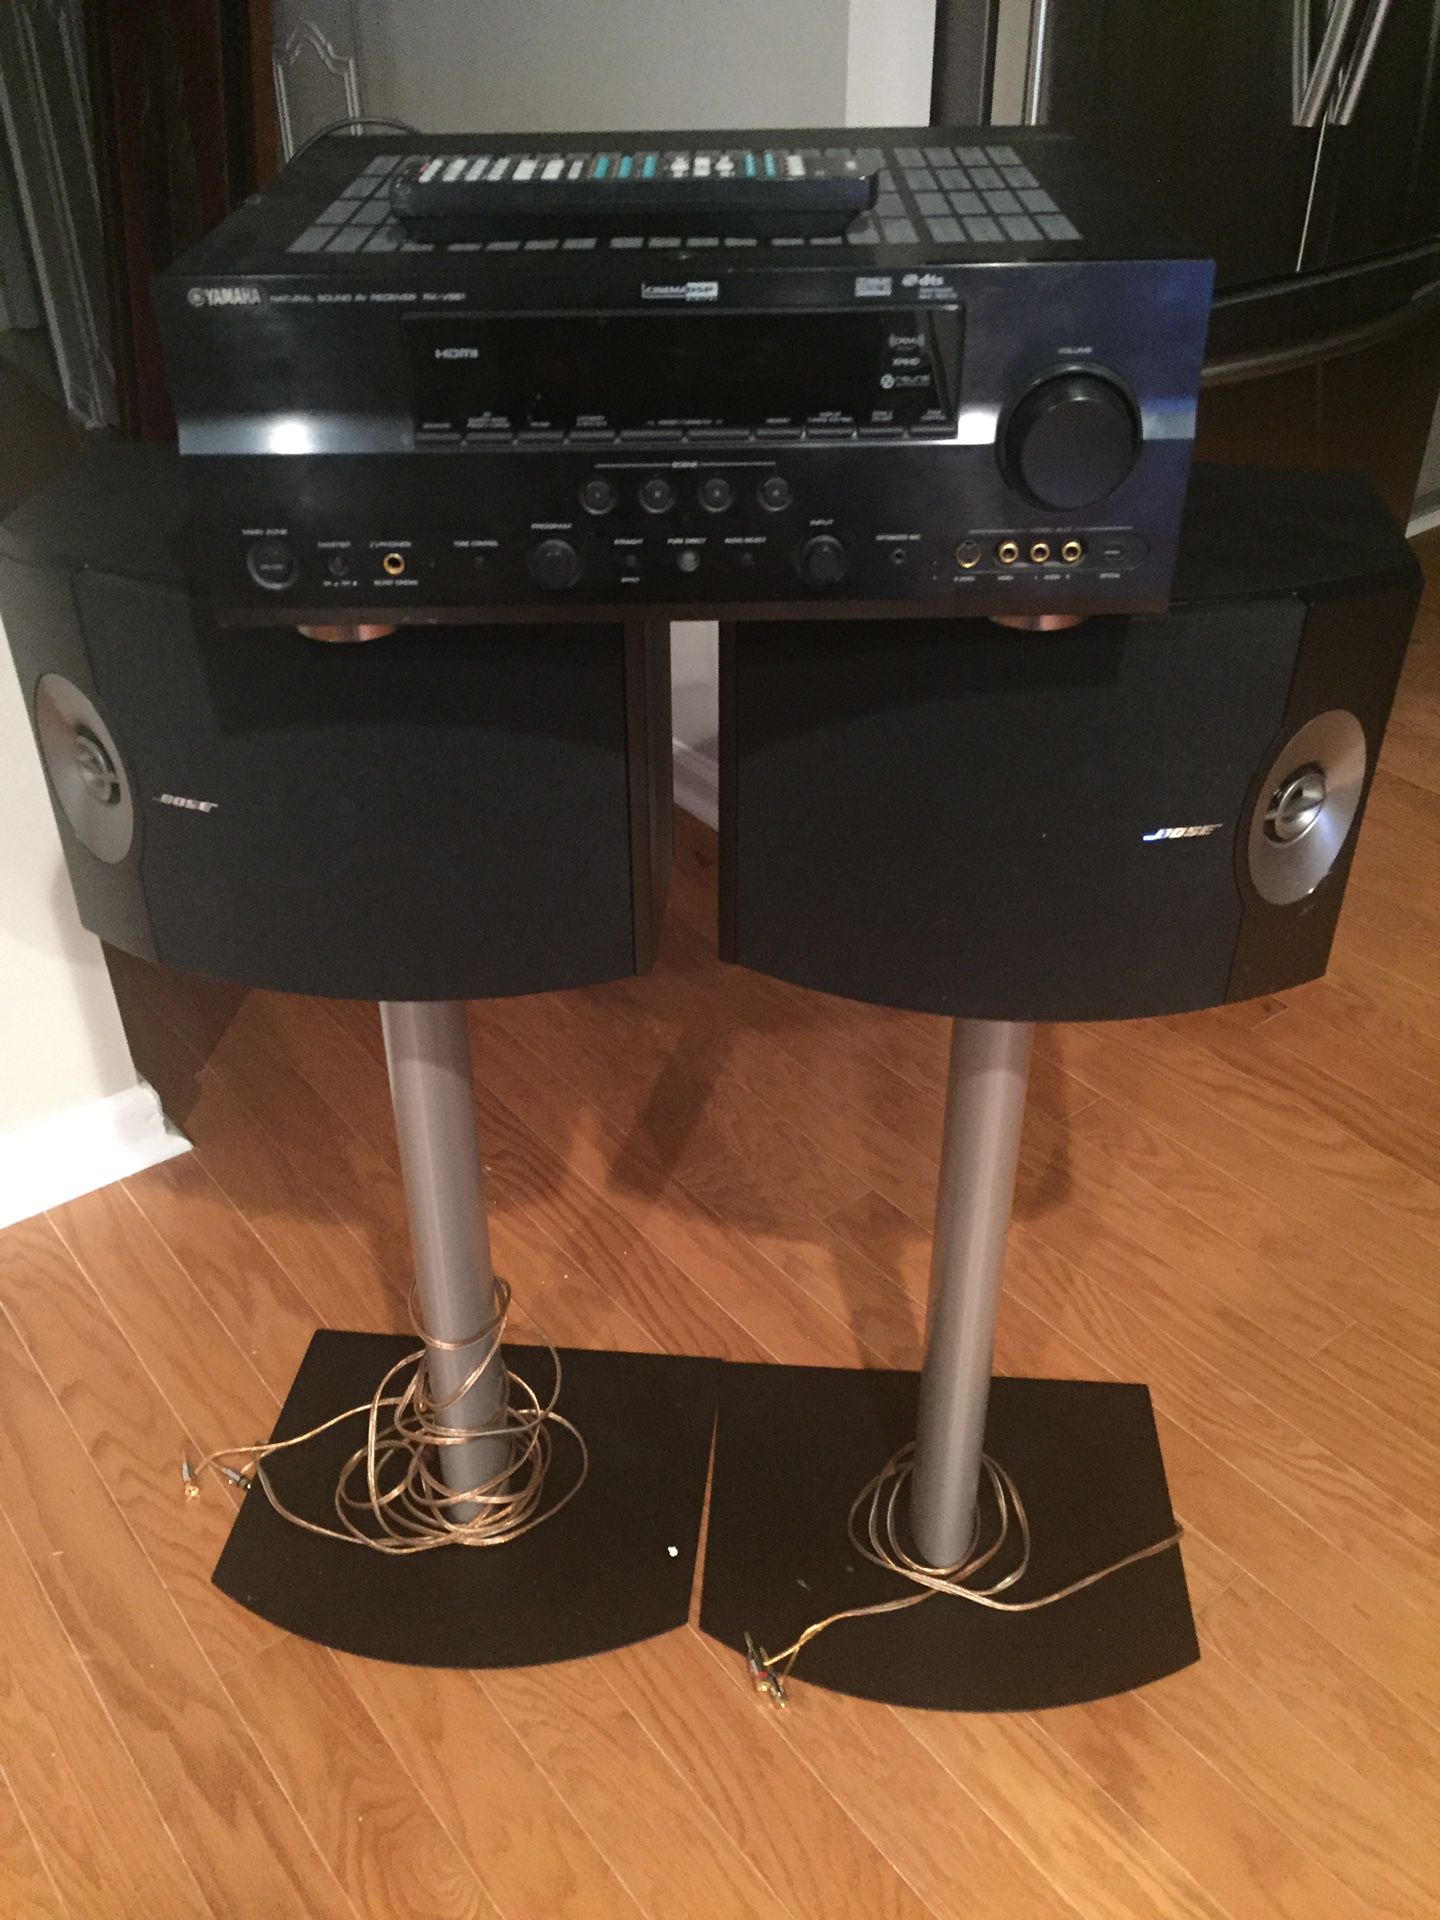 Bose 301 Speakers, Yamaha Receiver, Speakers stands, and speaker wire/connectors